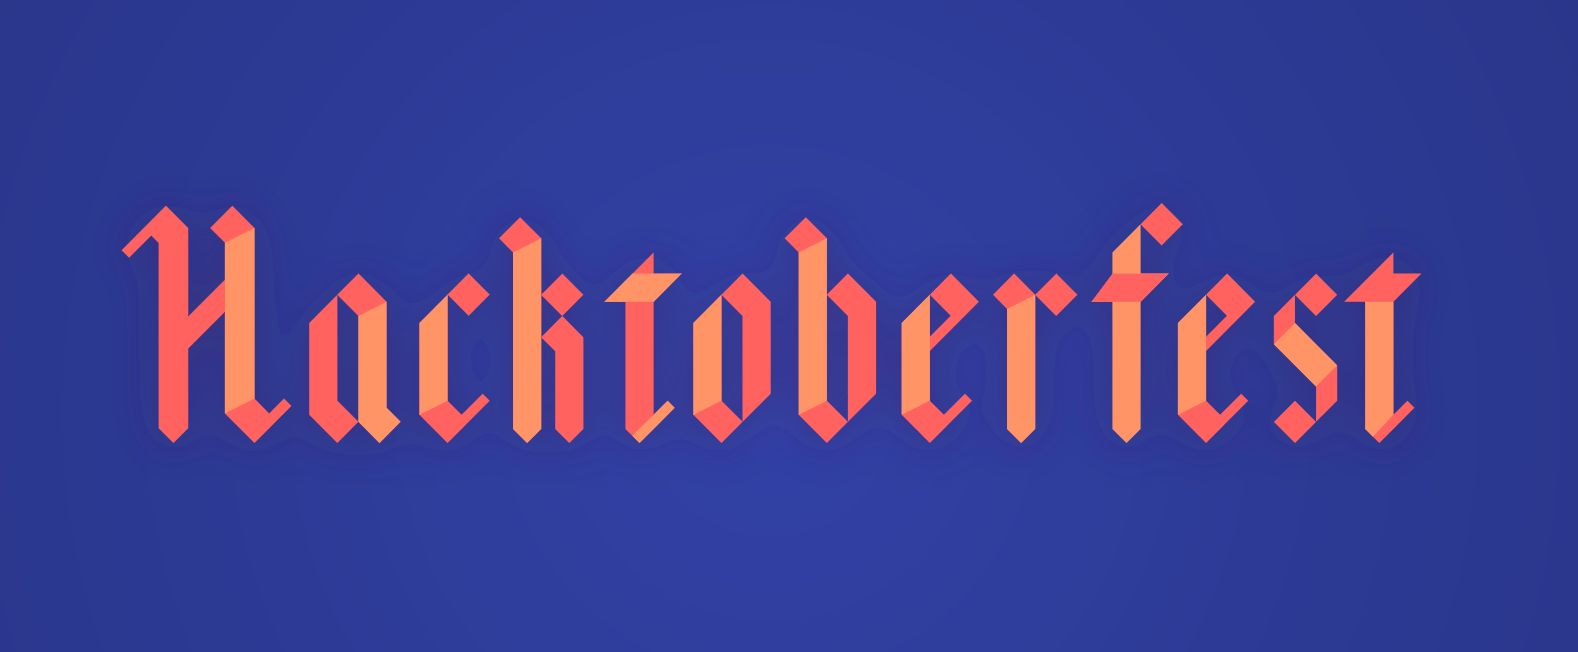 DigitalOcean Partners with GitHub to Support Open Source Projects during Hacktoberfest October 1–31